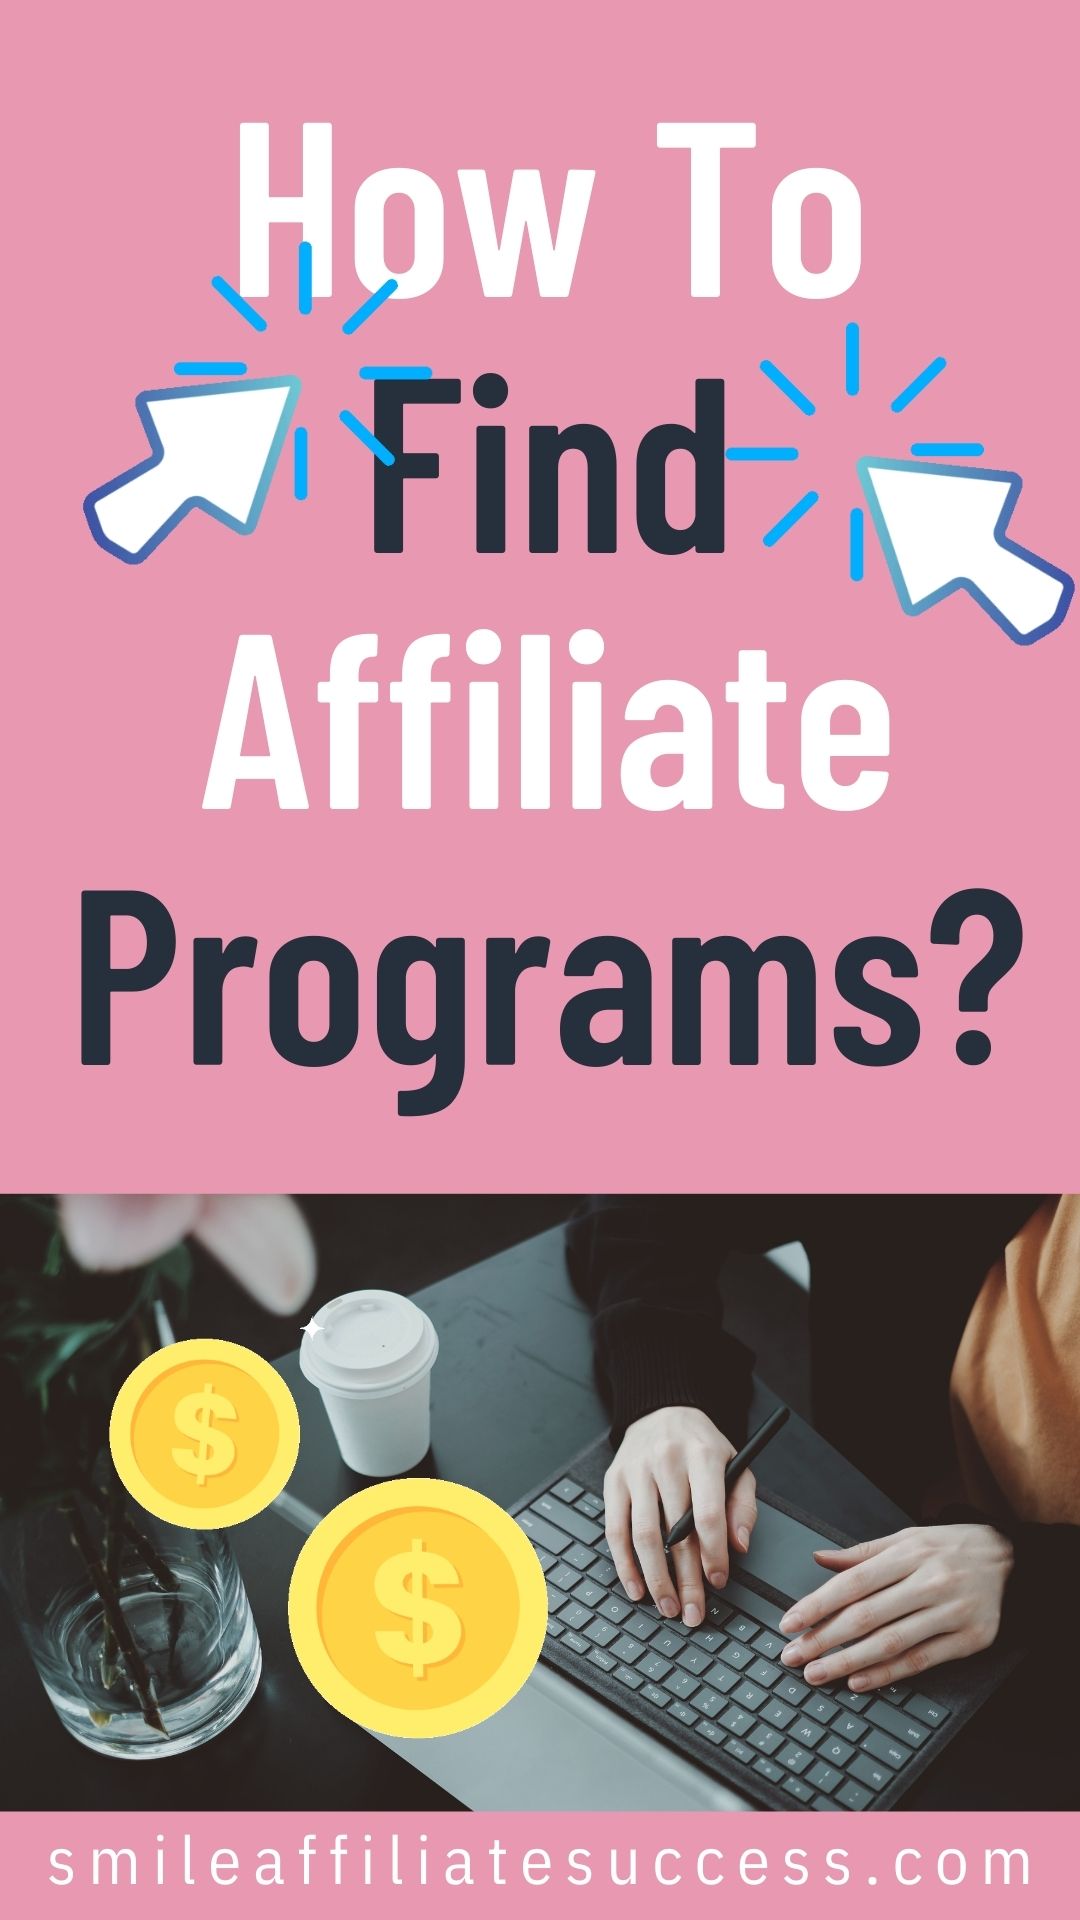 How To Find Affiliate Programs?